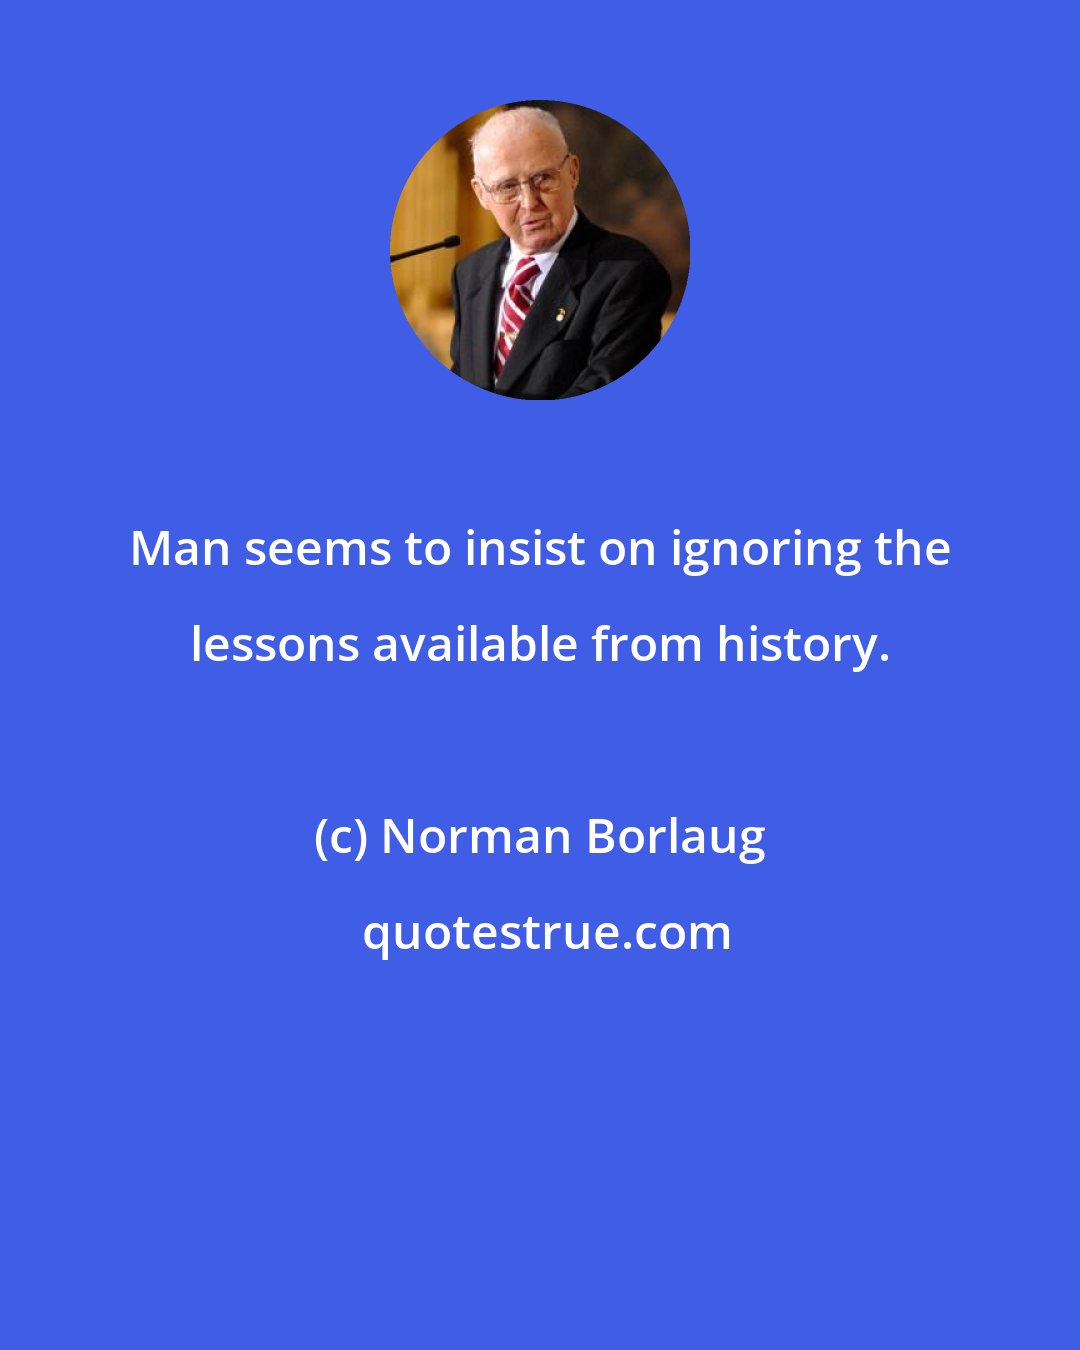 Norman Borlaug: Man seems to insist on ignoring the lessons available from history.